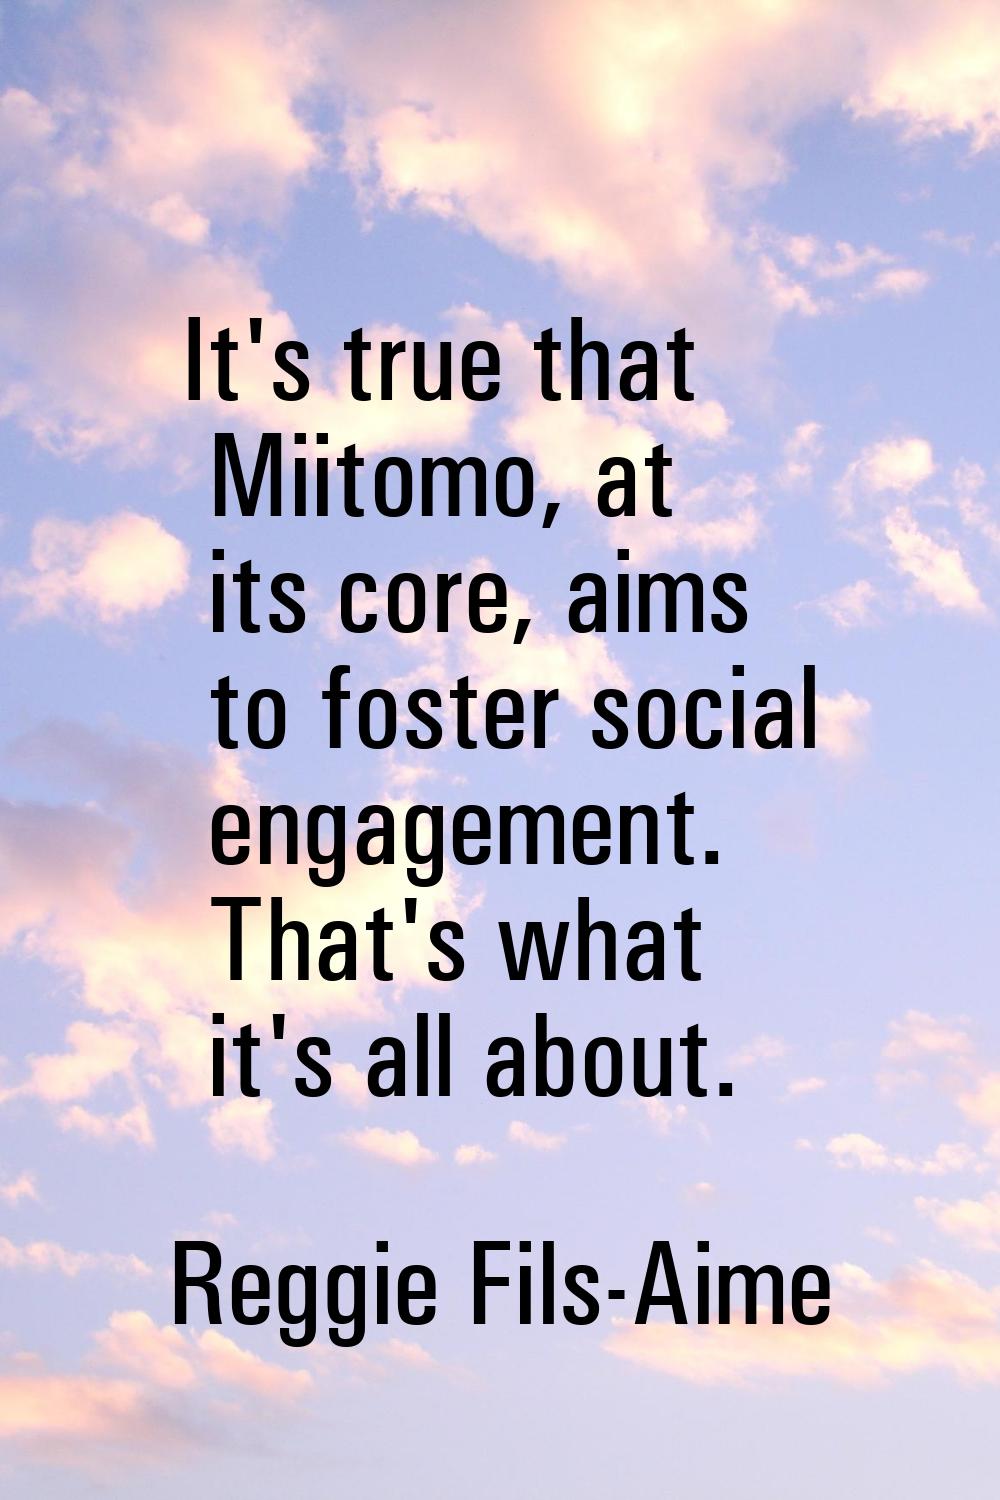 It's true that Miitomo, at its core, aims to foster social engagement. That's what it's all about.